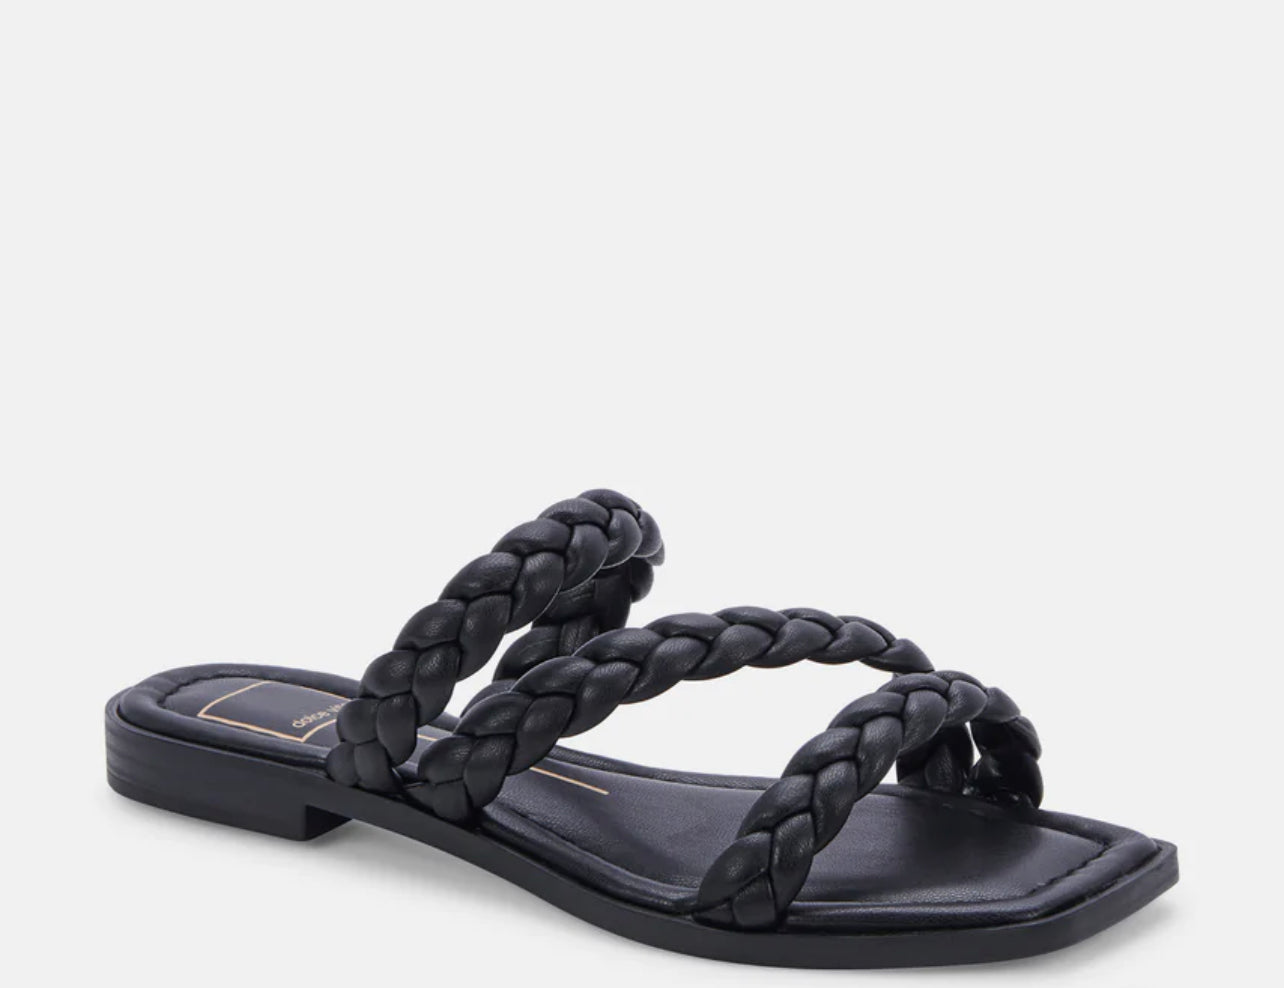 Iman Wide Sandals by Dolce Vita